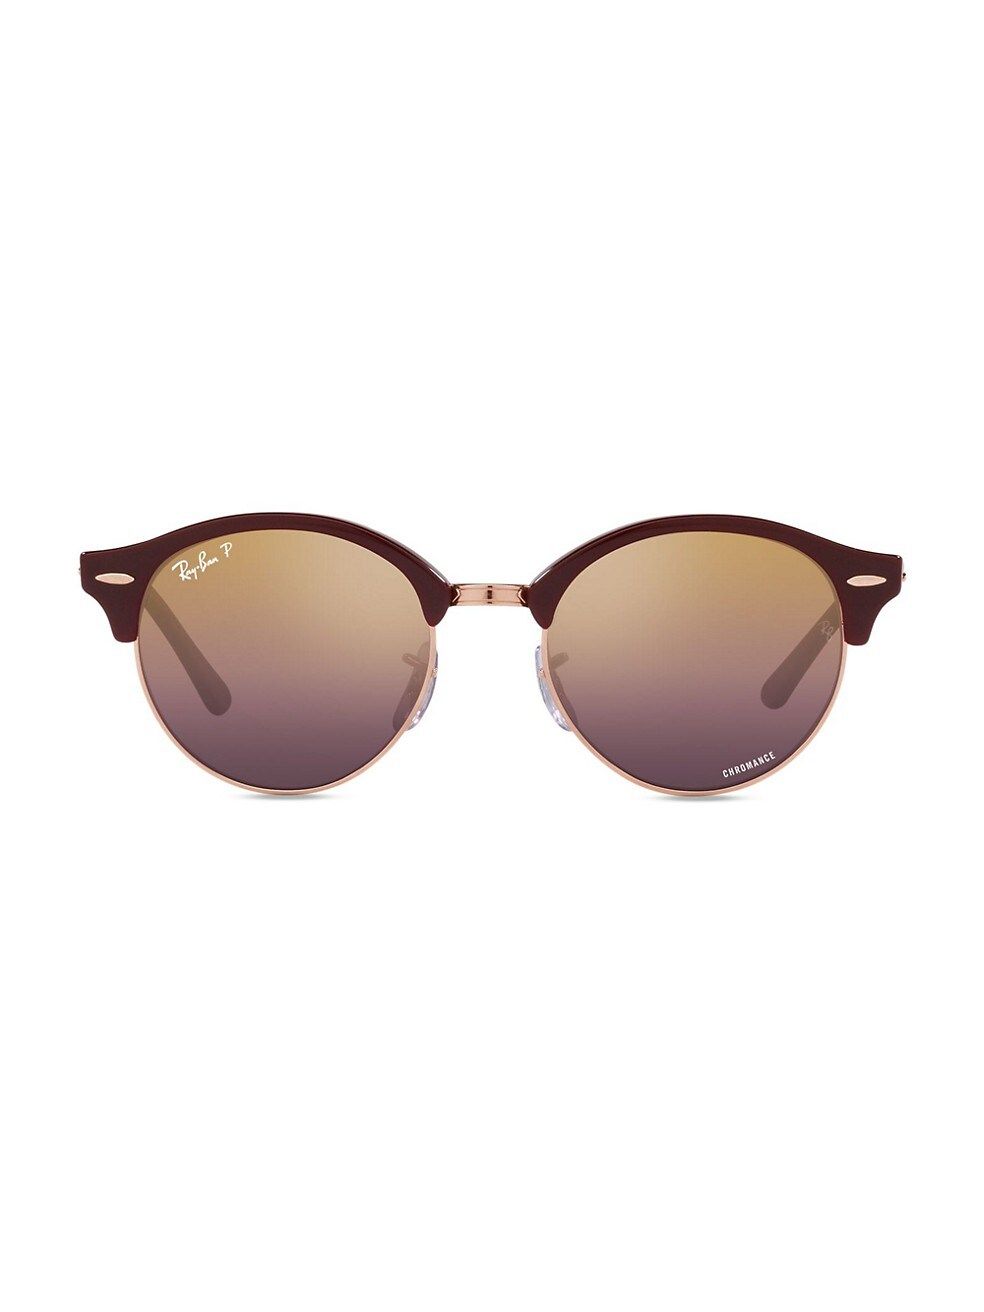 Ray-Ban RB4246 Clubround Classic 51MM Round Sunglasses | Saks Fifth Avenue